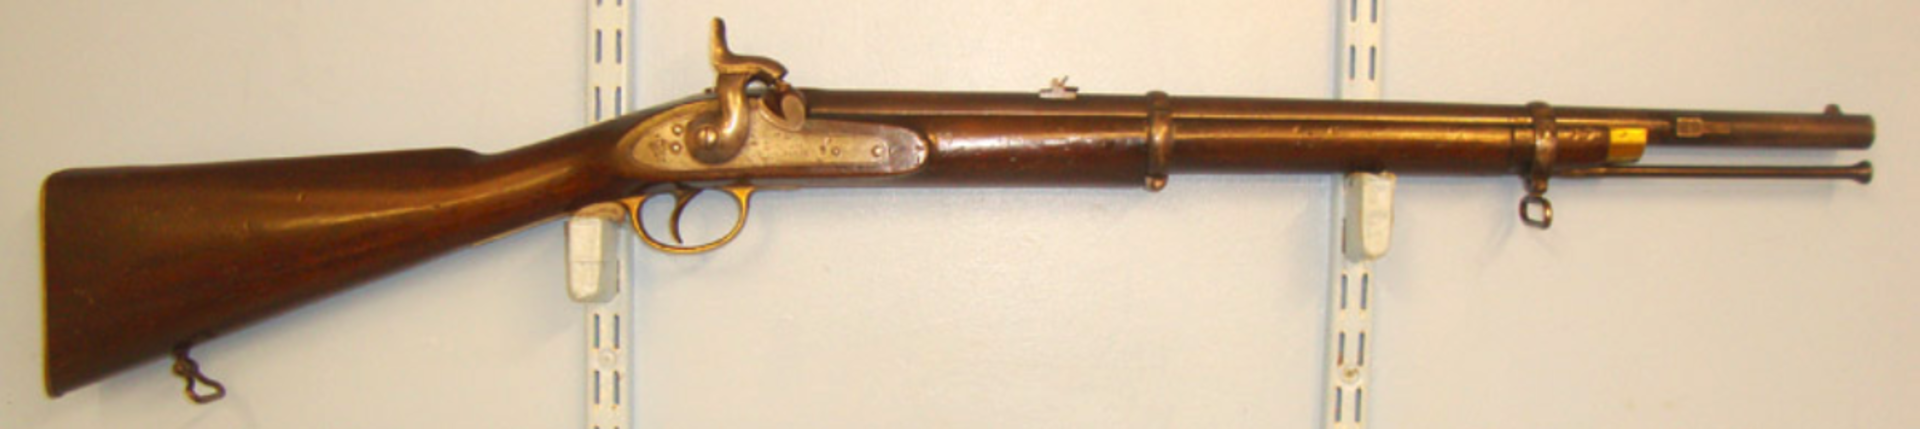 VERY RARE, 1856 Dated British 1853 Pattern Enfield Tower .577 Calibre 2 Band Percussion Carbine